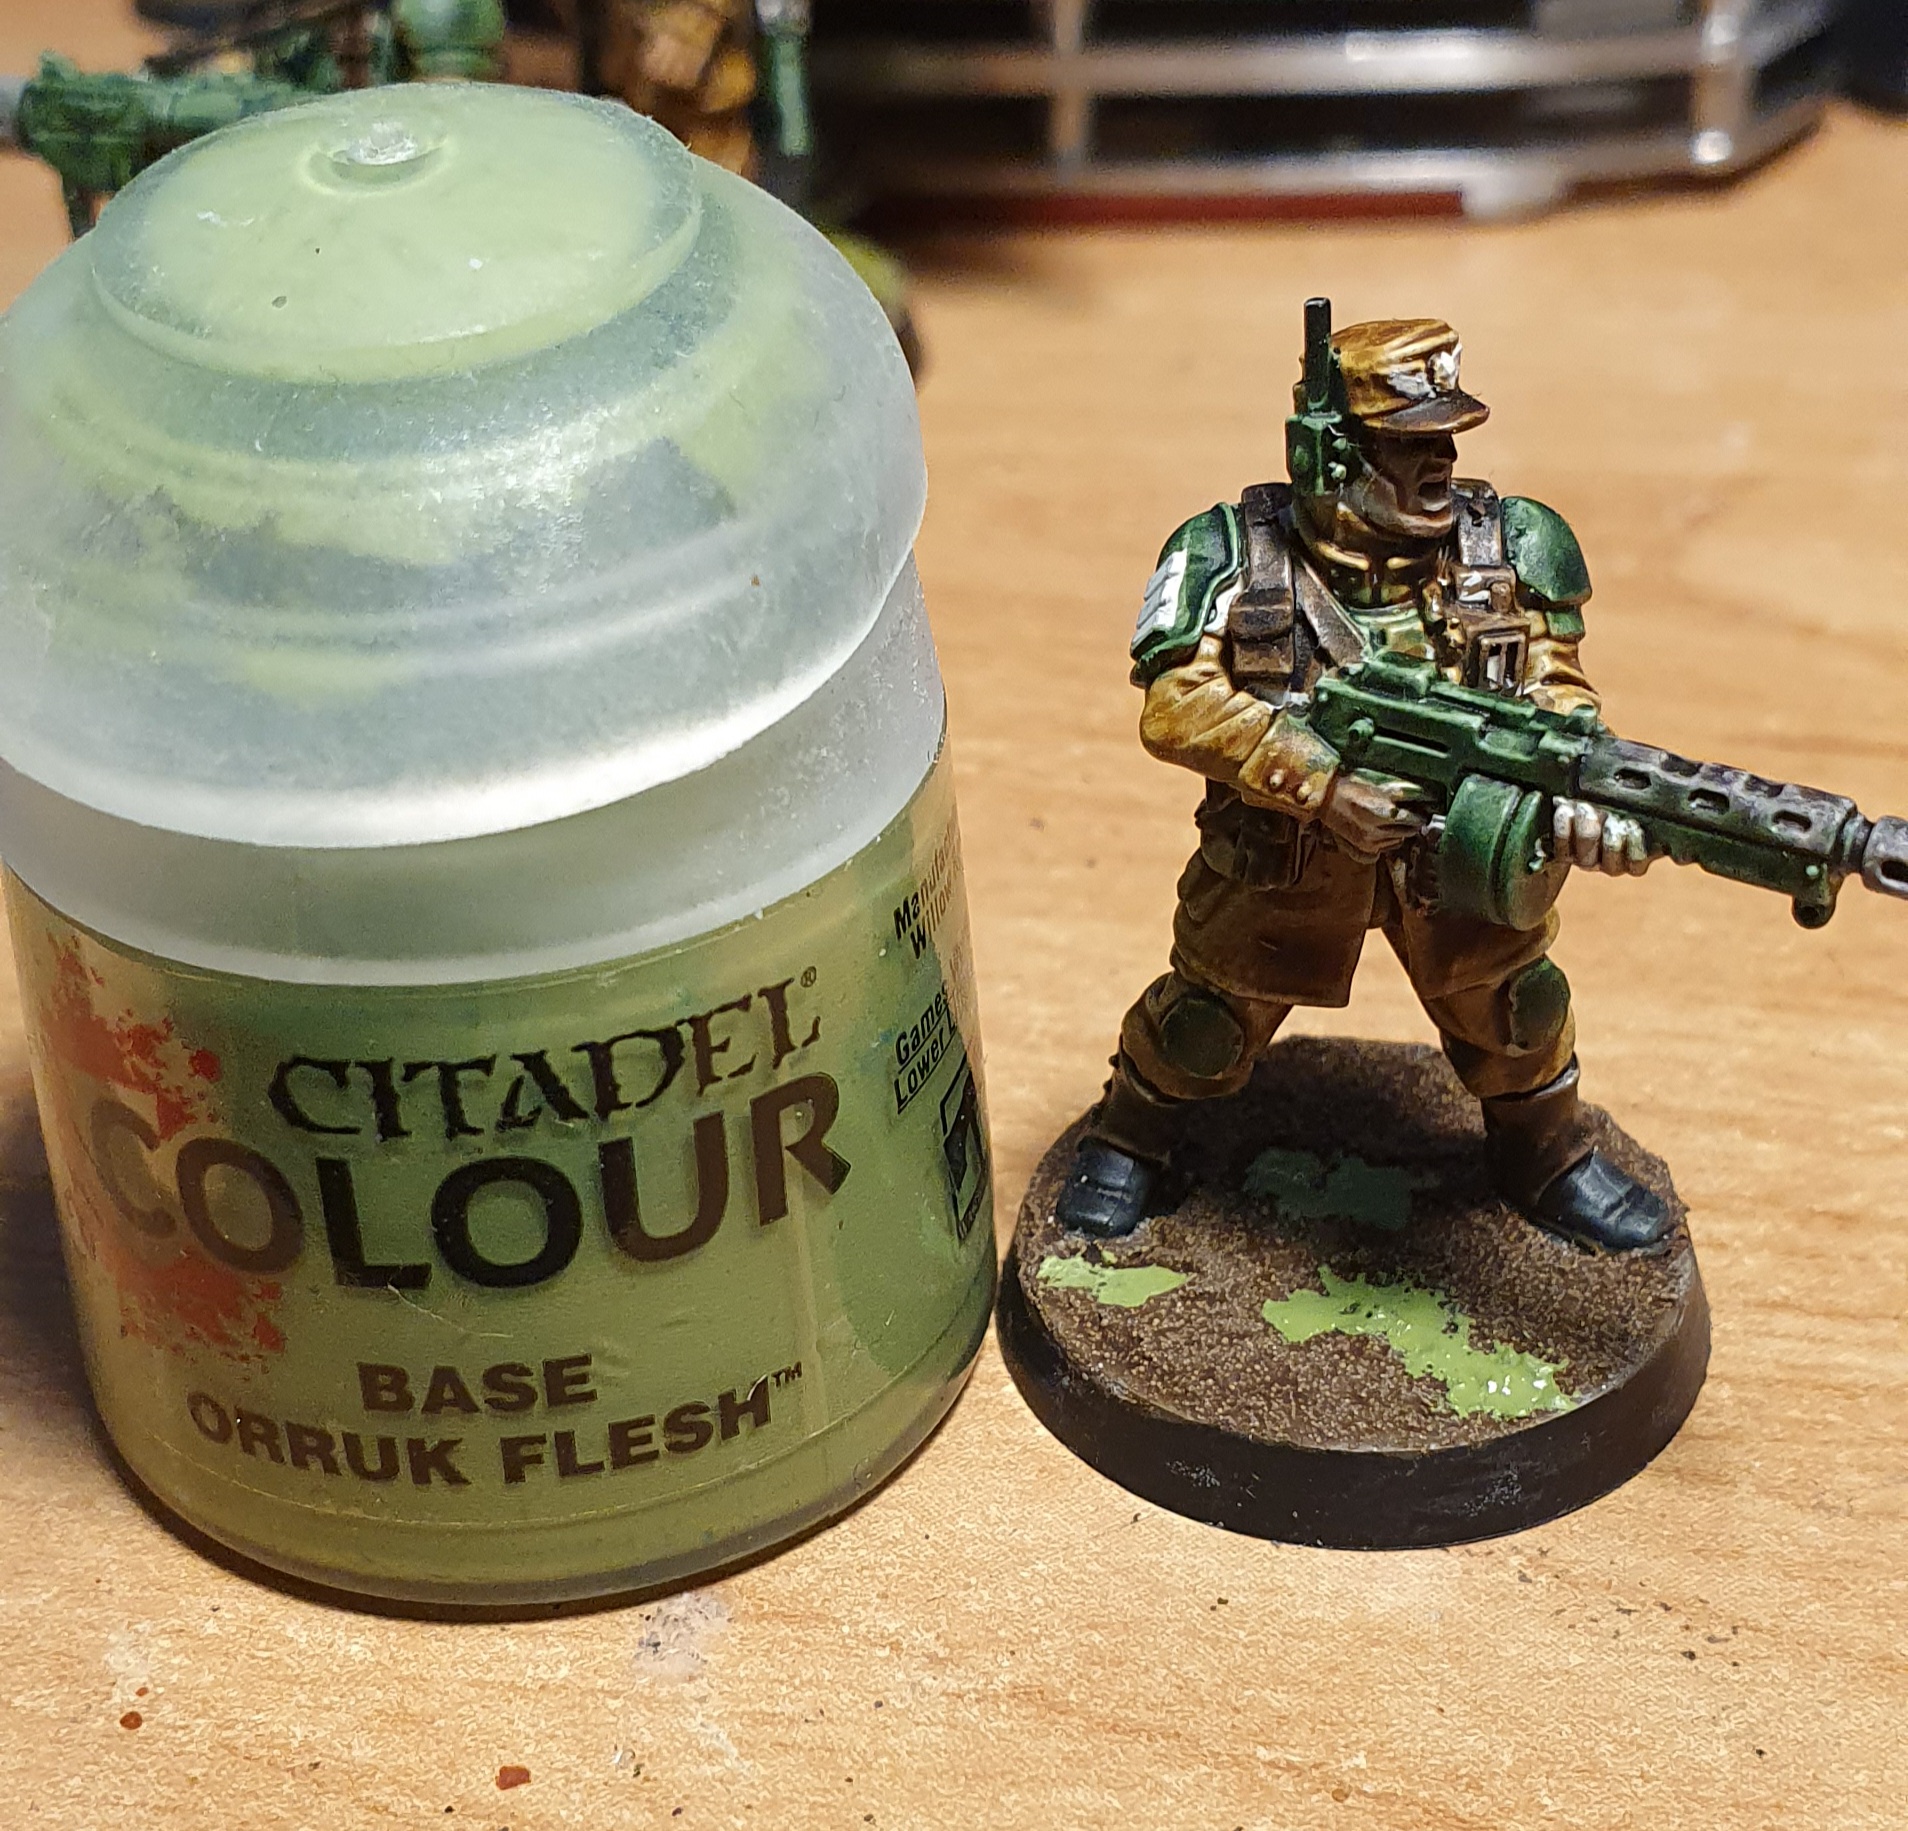 Piddling in puddles – OnTableTop – Home of Beasts of War